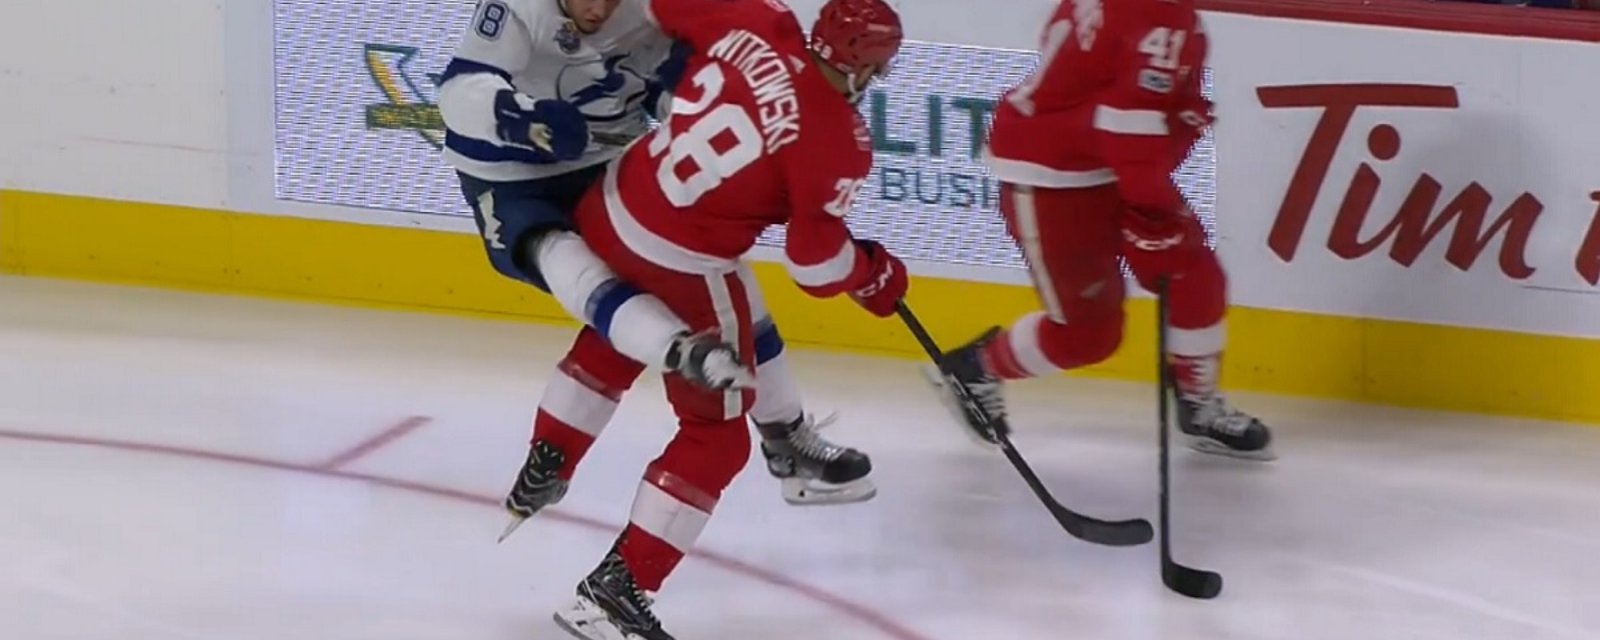 Huge hit from Witkowski sends NHL rookie flying through the air.